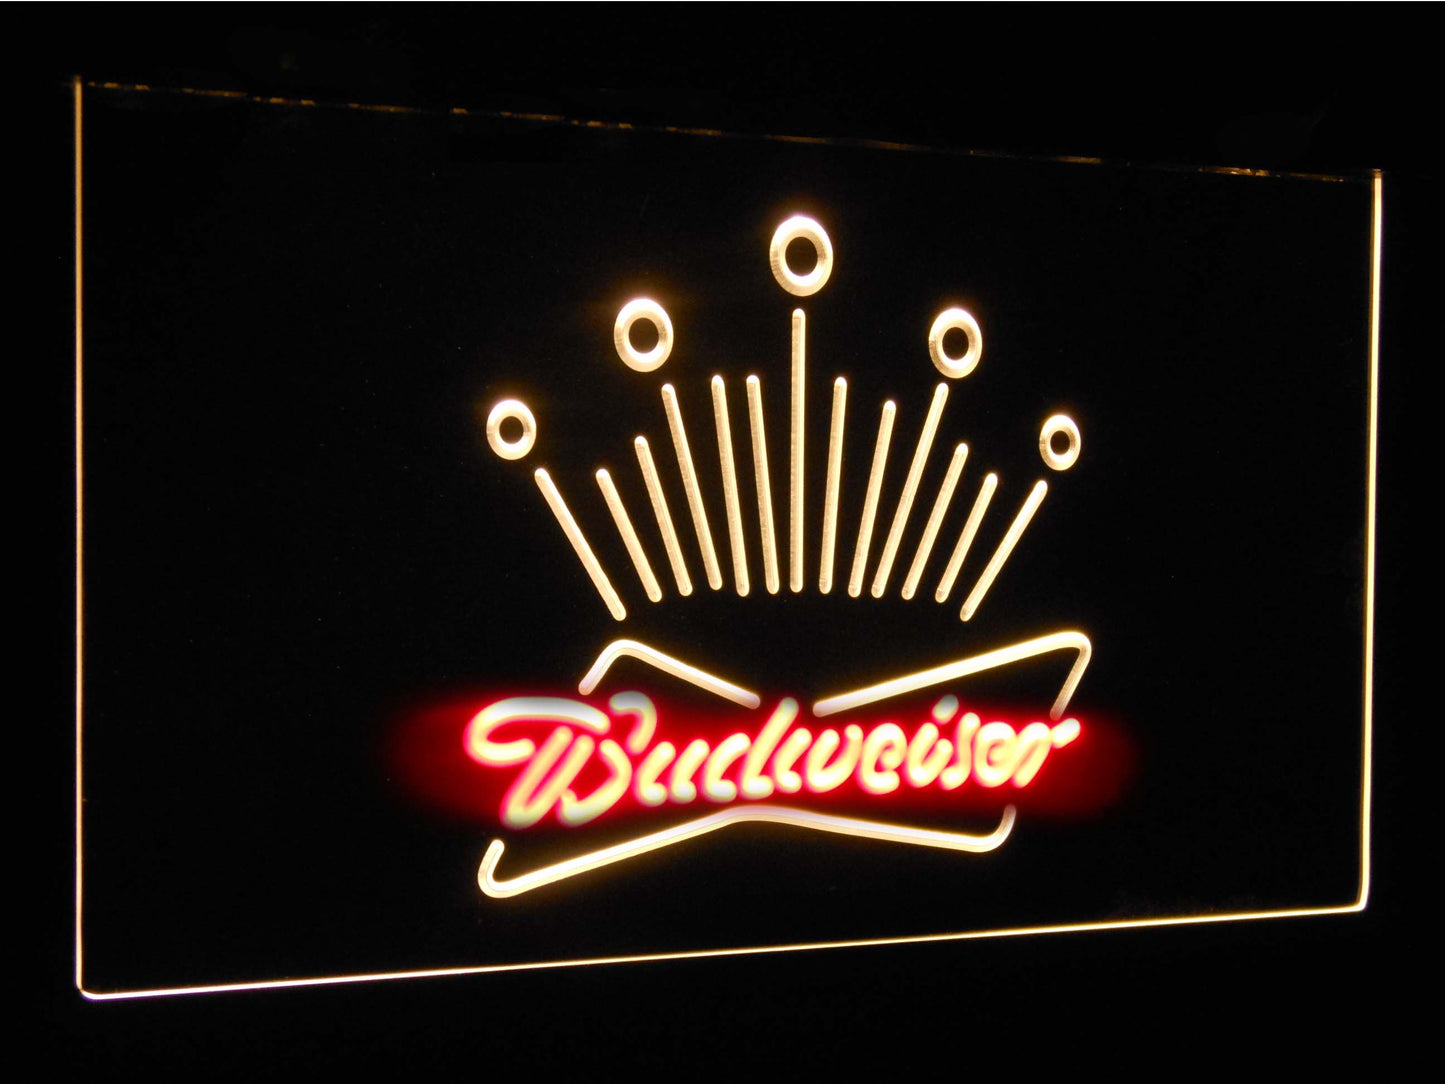 Budweiser Eagle  Club Bar Decoration Gift Dual Color Led Neon Light Signs st6-a2007 by Woody Signs Co. - Handmade Crafted Unique Wooden Creative